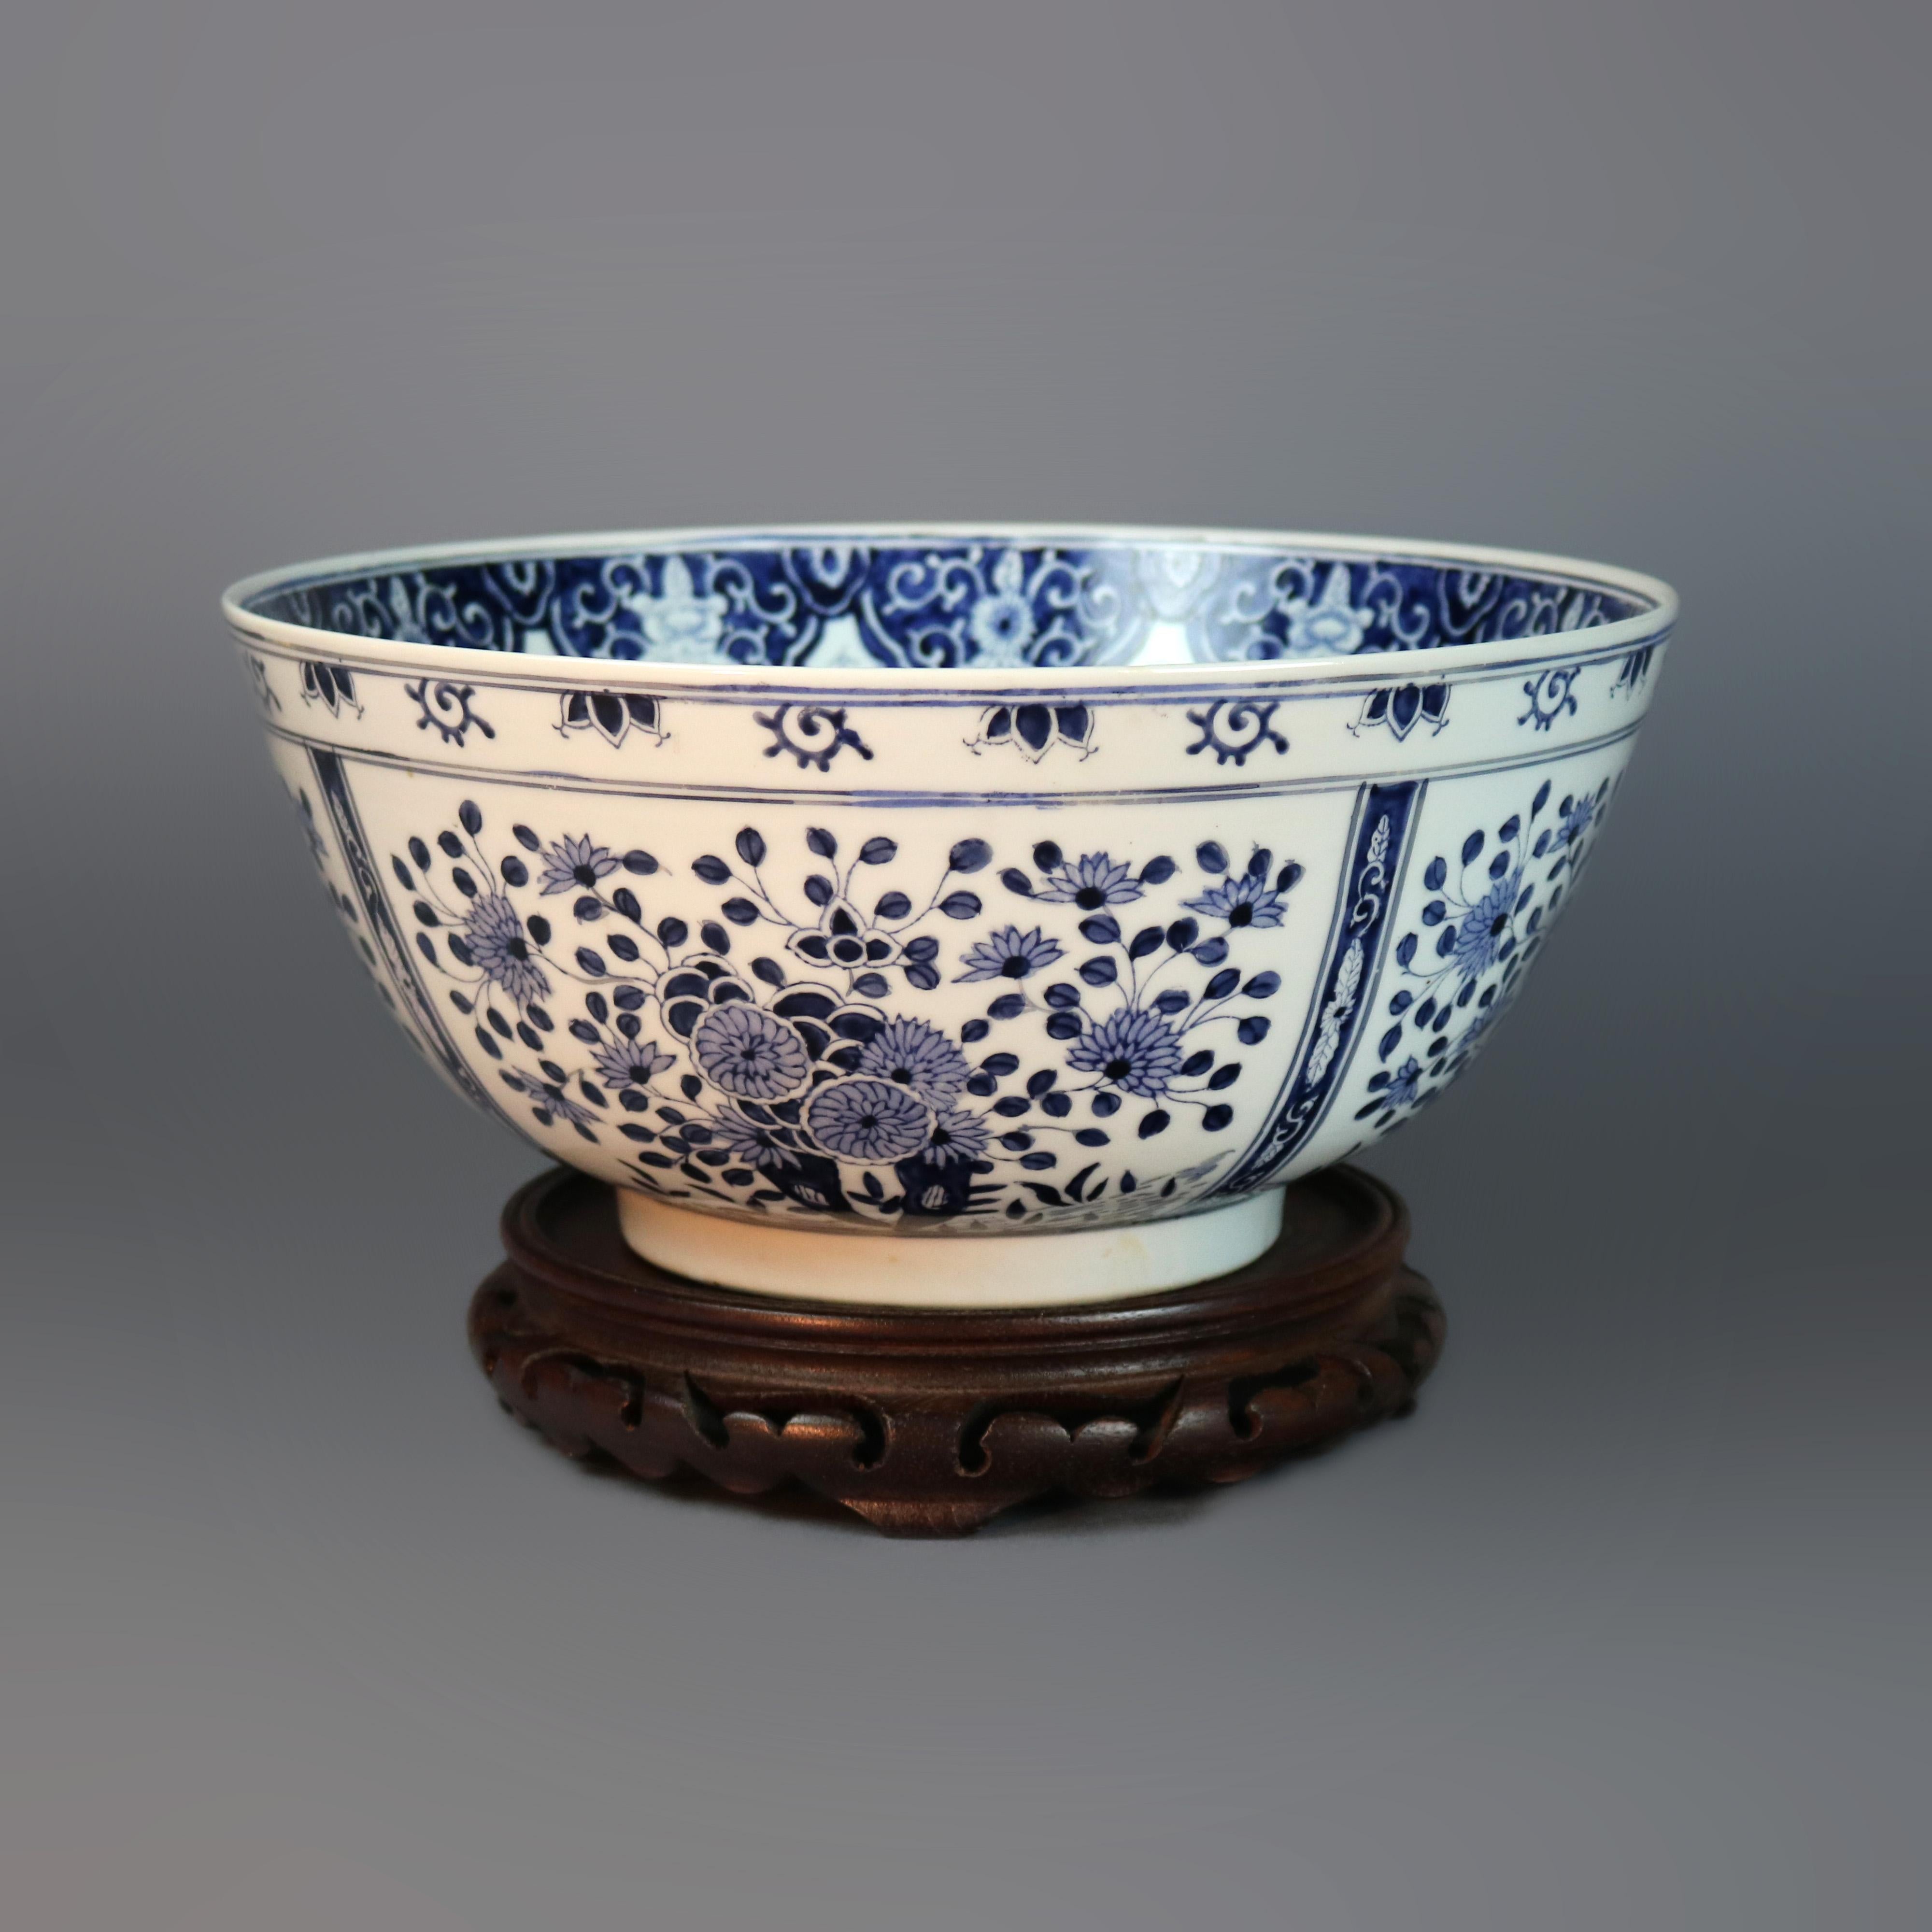 An antique blue and white Japanese porcelain bowl offers all-over stylized floral decoration and is seated on carved hardwood base, stamp reads 